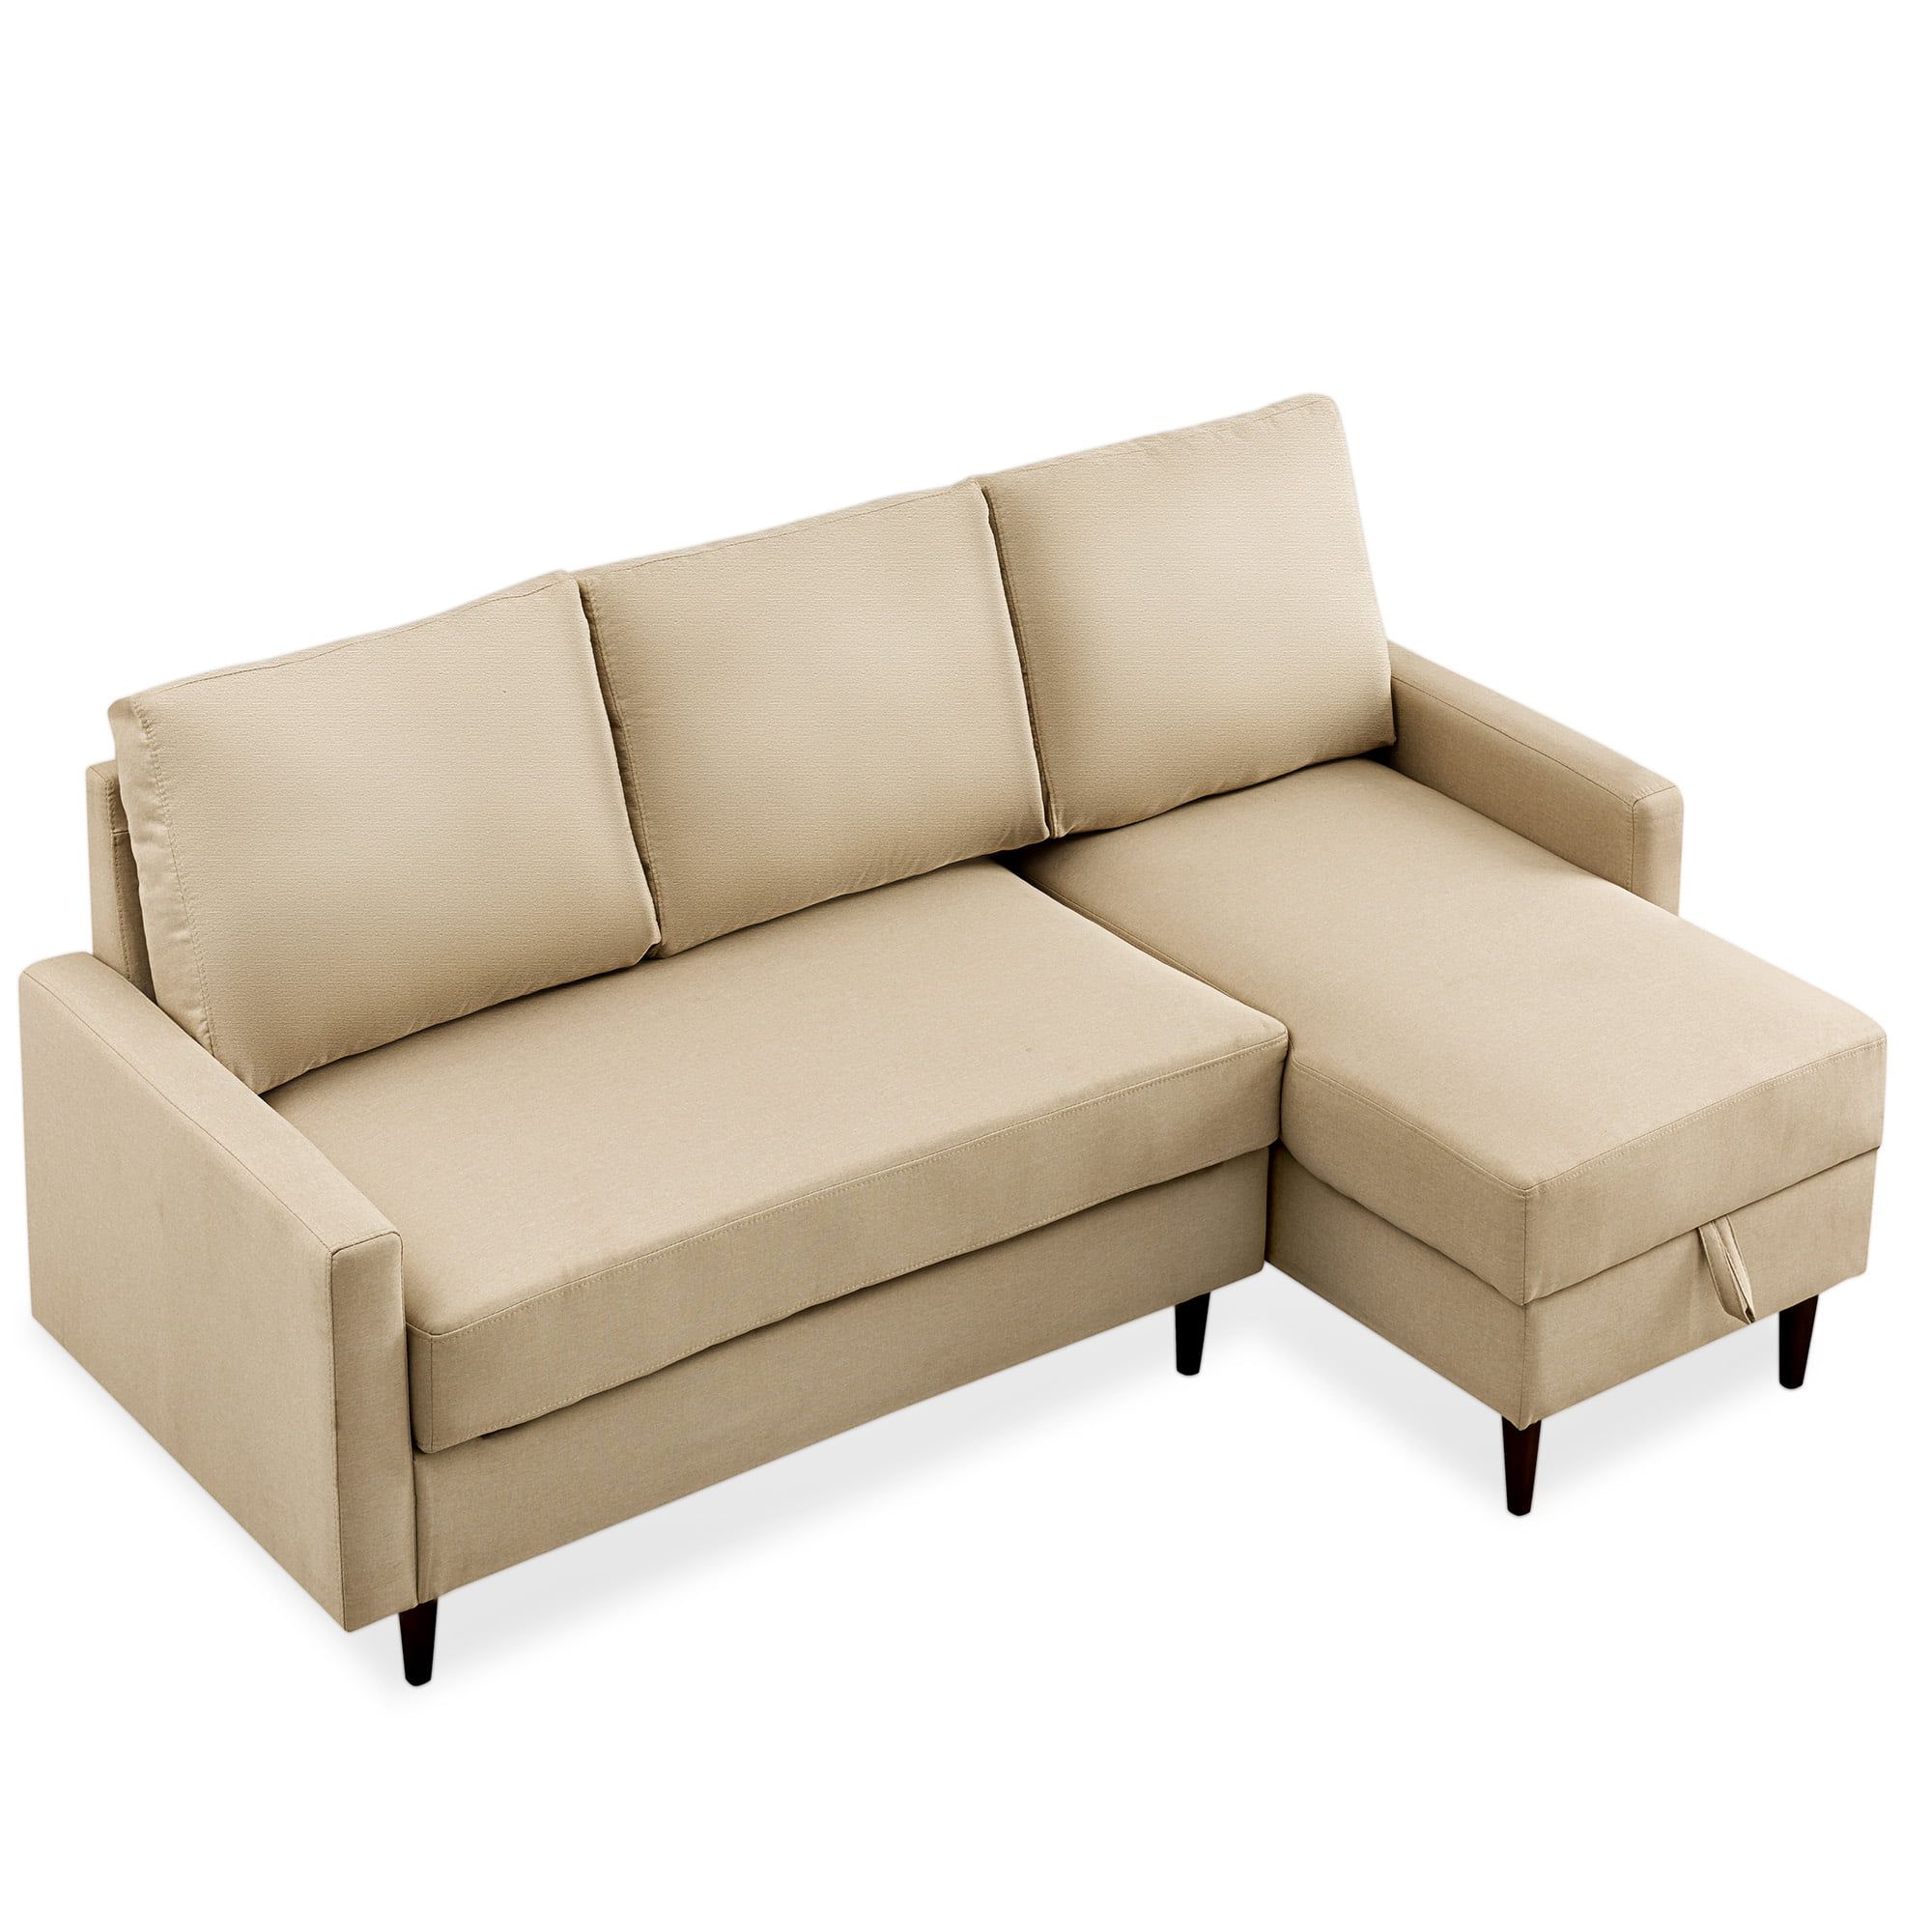 Beige Mid Century Pull Out Sleeper Sectional Sofa With Reversible Within Sofas In Beige (View 17 of 20)